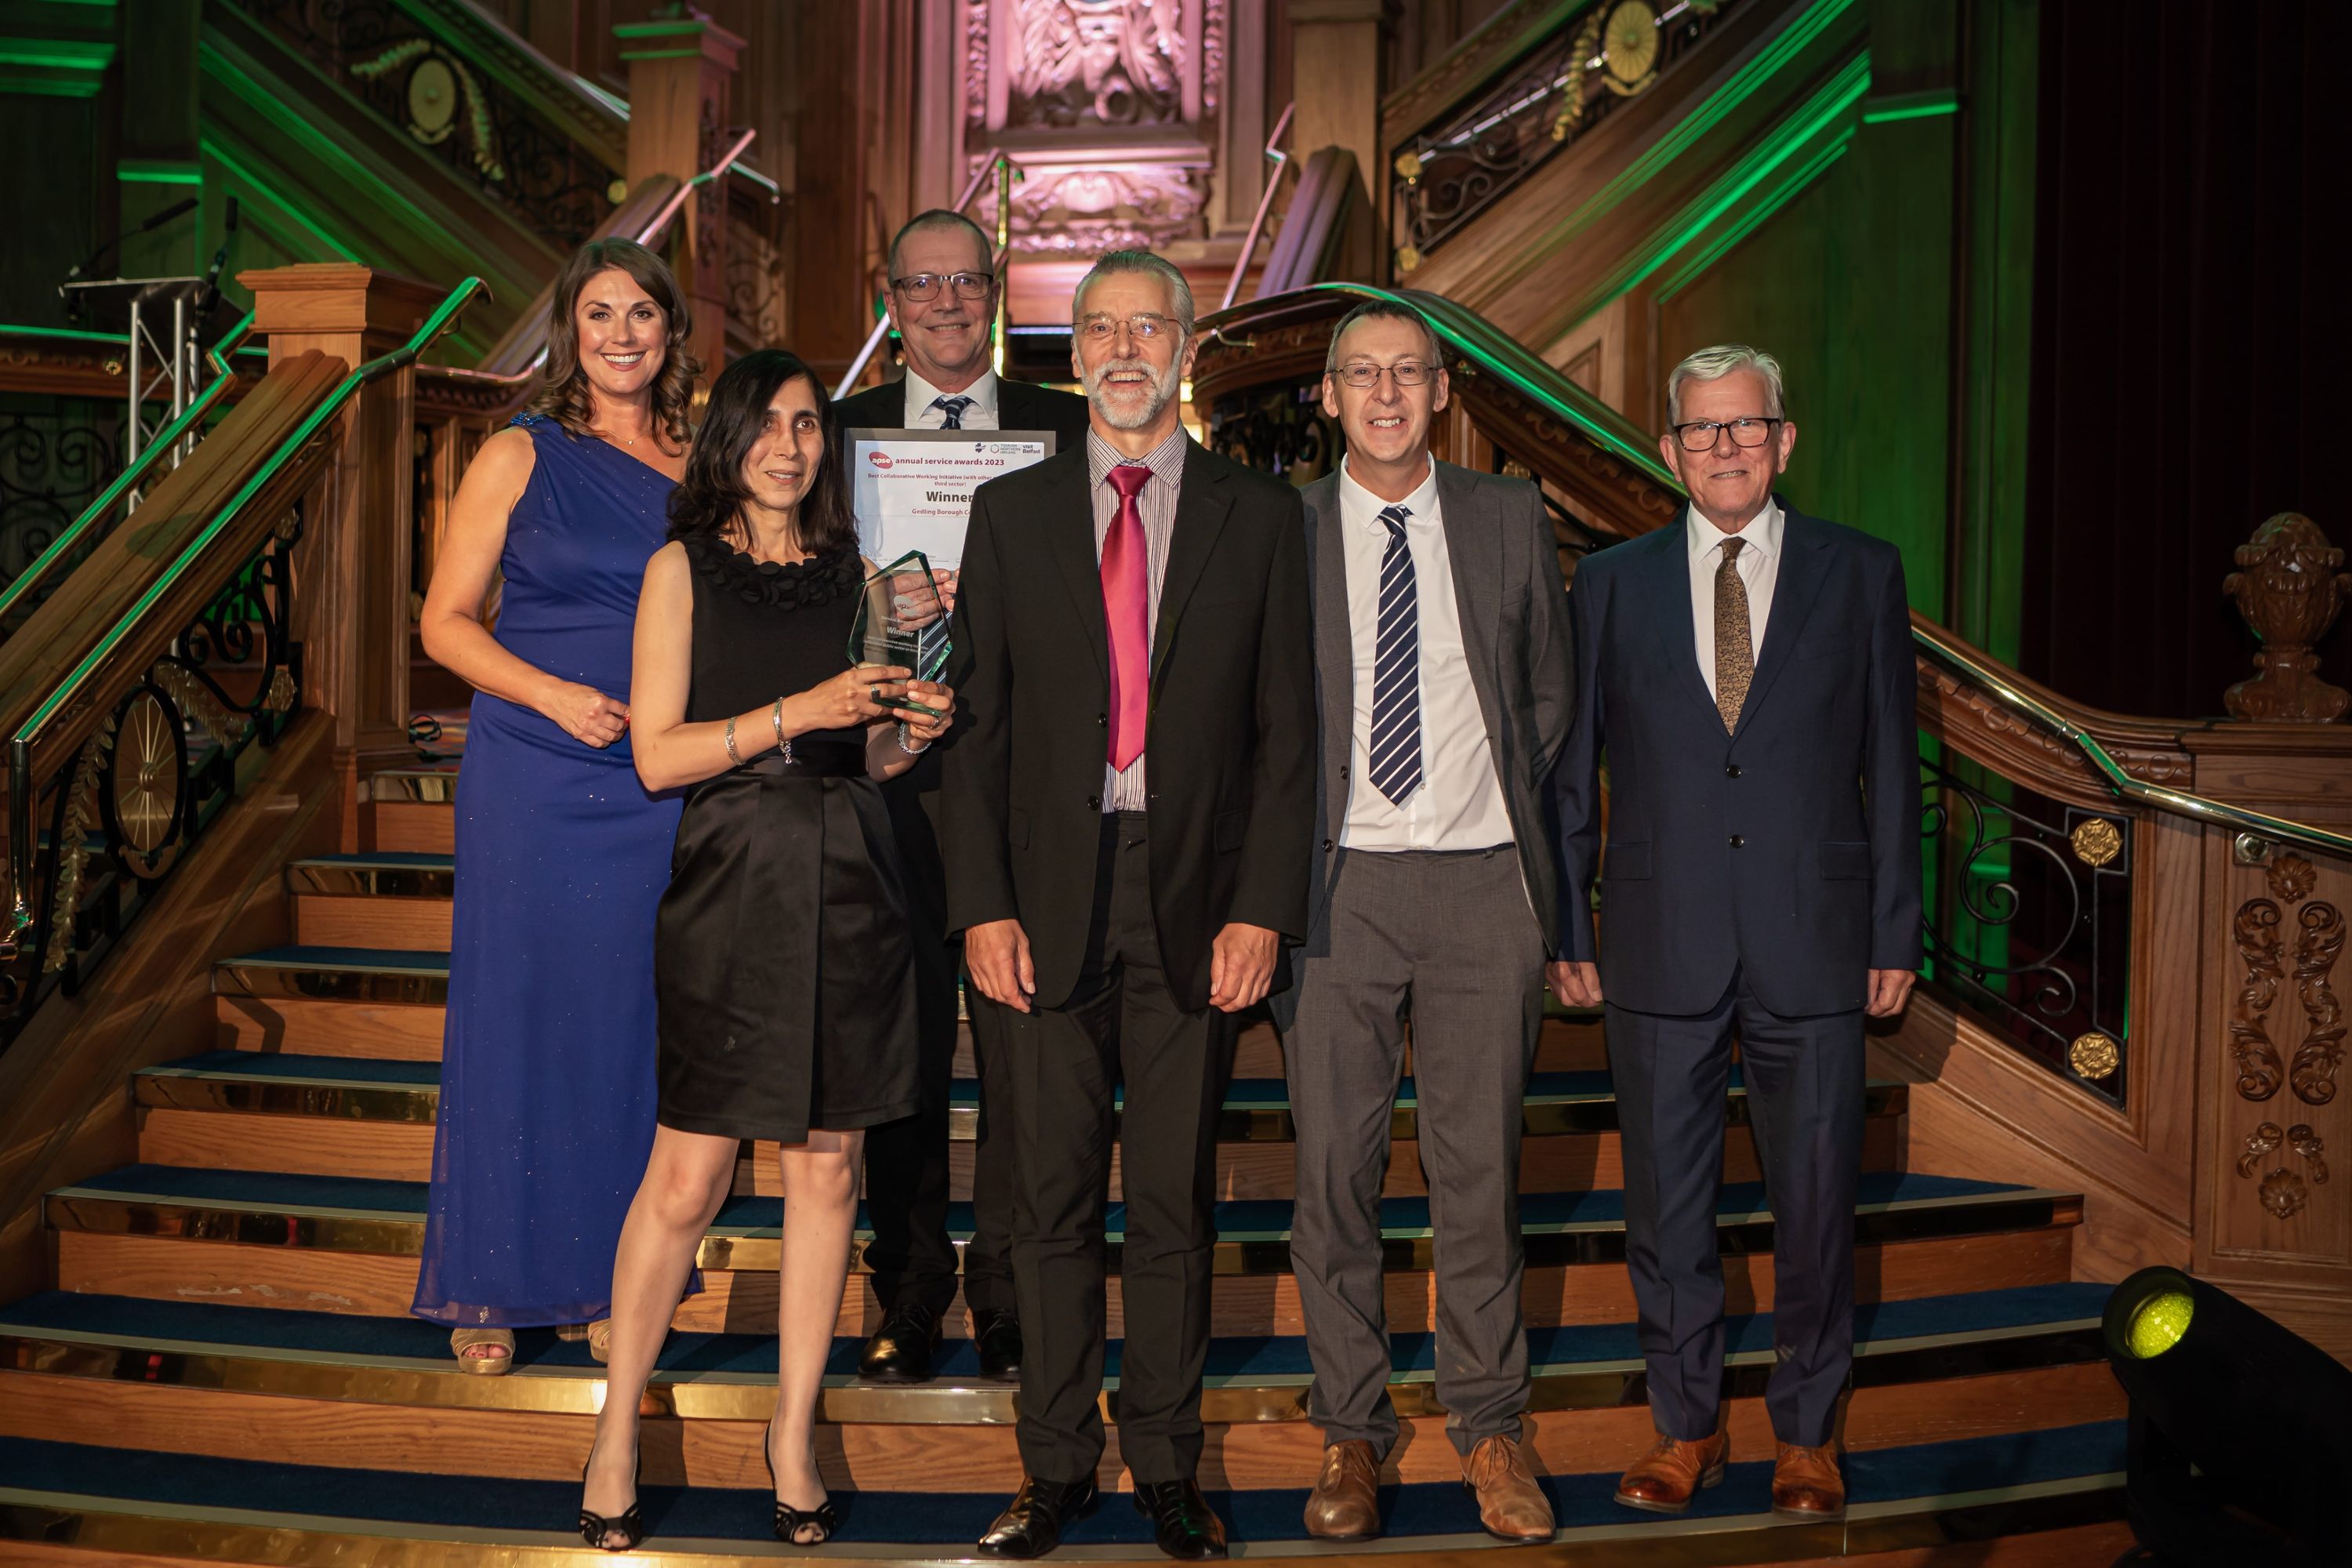 Image attached – From left to right: Presenter Sarah Travers, Sim Duhra Gedling Borough Council Climate Change Officer, Nick Burrows Managing Director at PSTAX (event sponsor), Melvyn Cryer Gedling Borough Council Head of Environment, Mike Hill Gedling Borough Council Chief Executive and Councillor John Clarke MBE Leader of Gedling Borough Council at the APSE Award Ceremony.